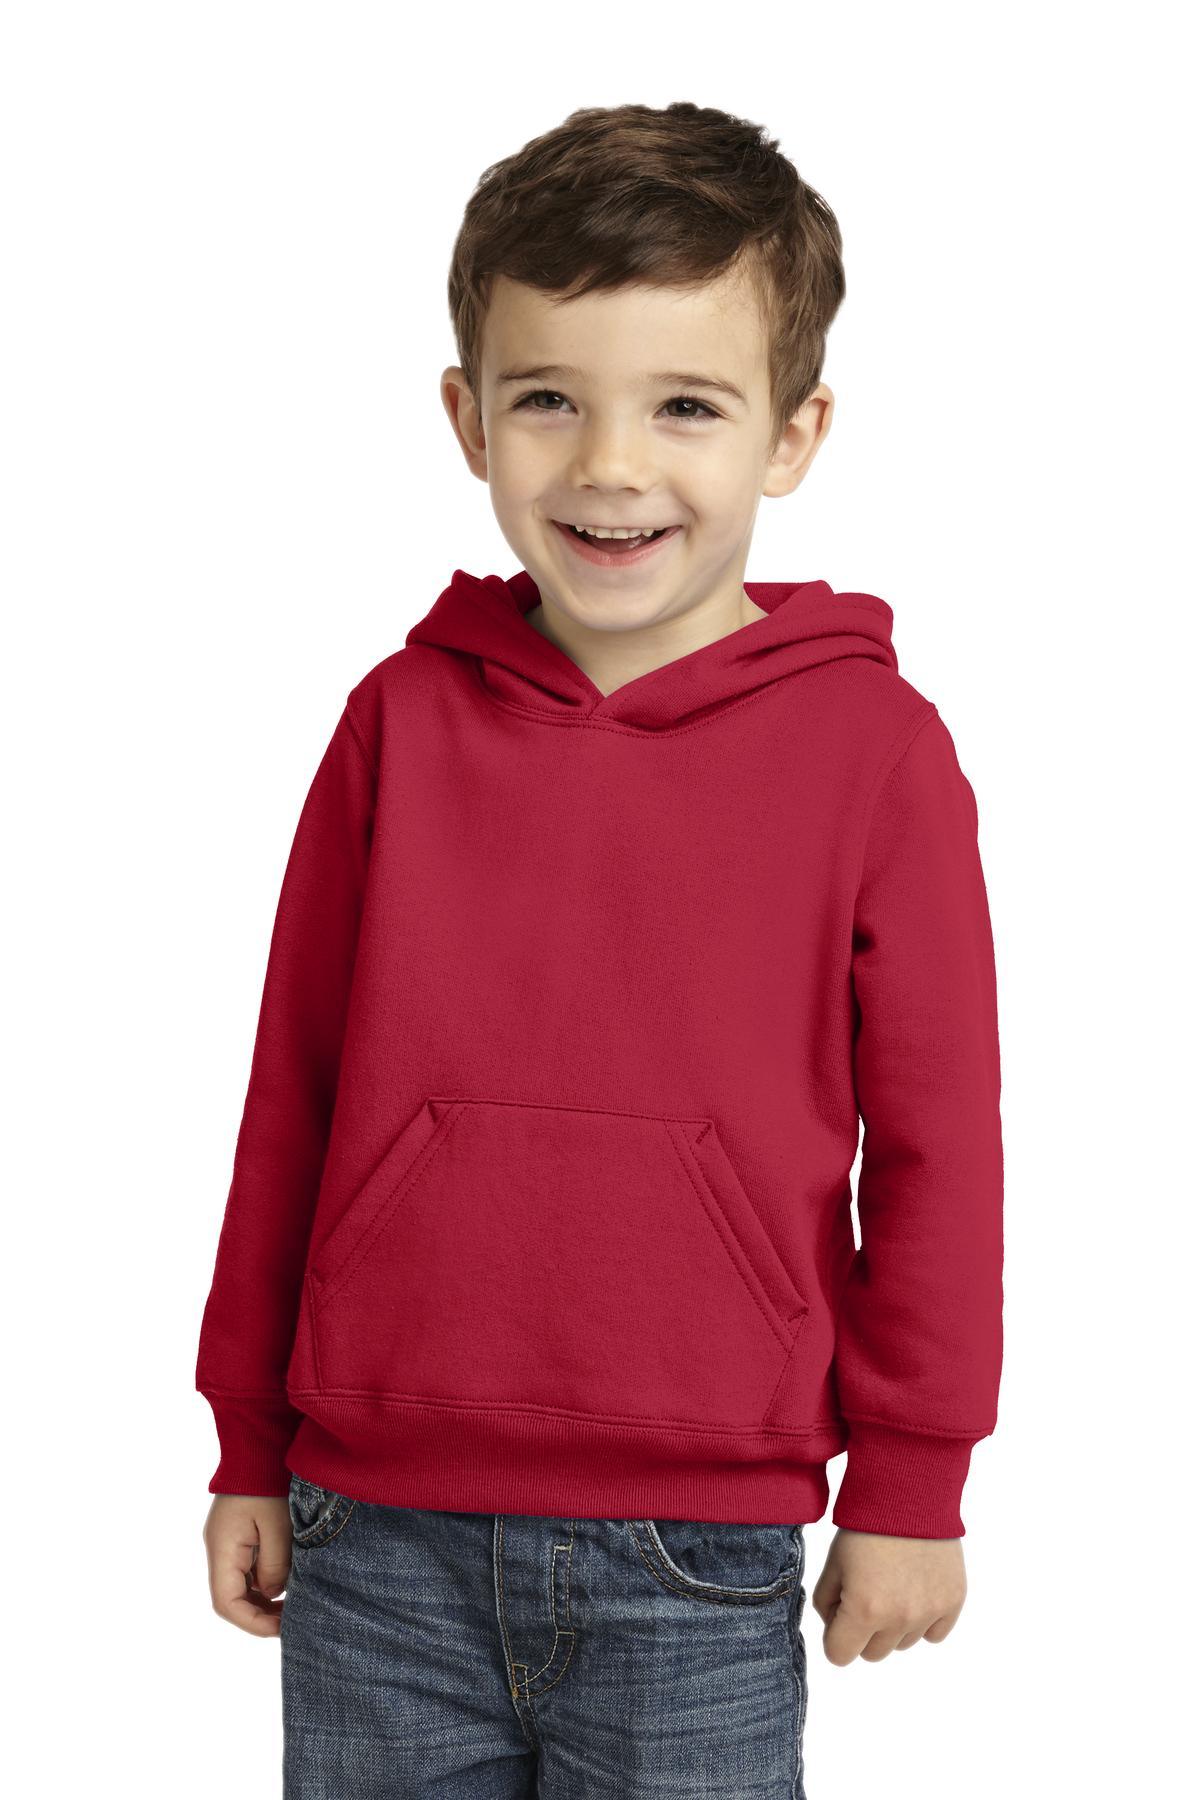 Port & Company Toddler Core Fleece Pullover Hooded Sweatshirt. CAR78TH - Dresses Max